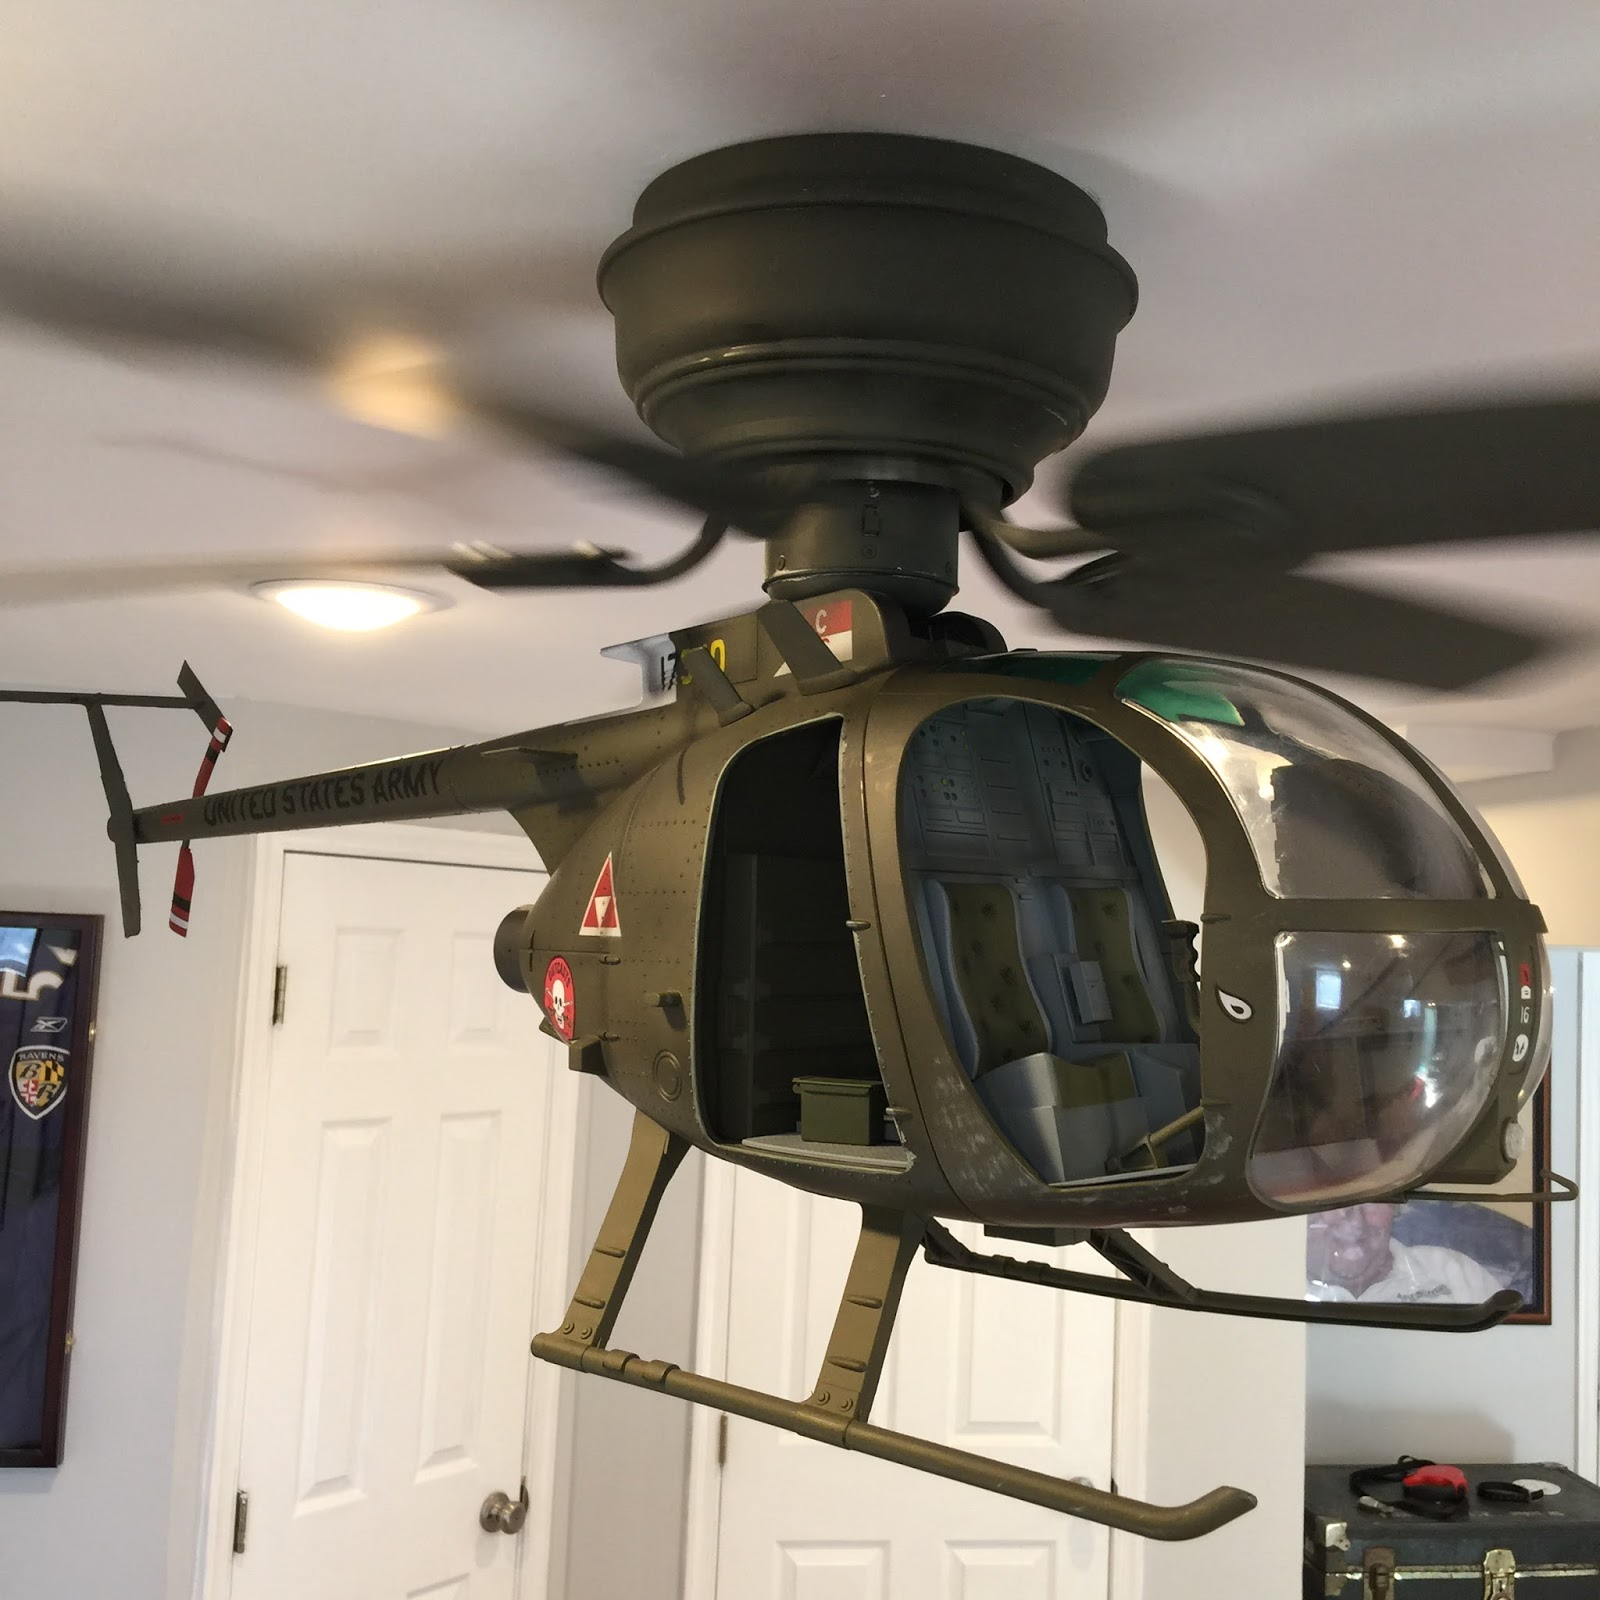 Super Cool Helicopter Ceiling Fan L Shaped And Ceiling regarding sizing 1600 X 1600